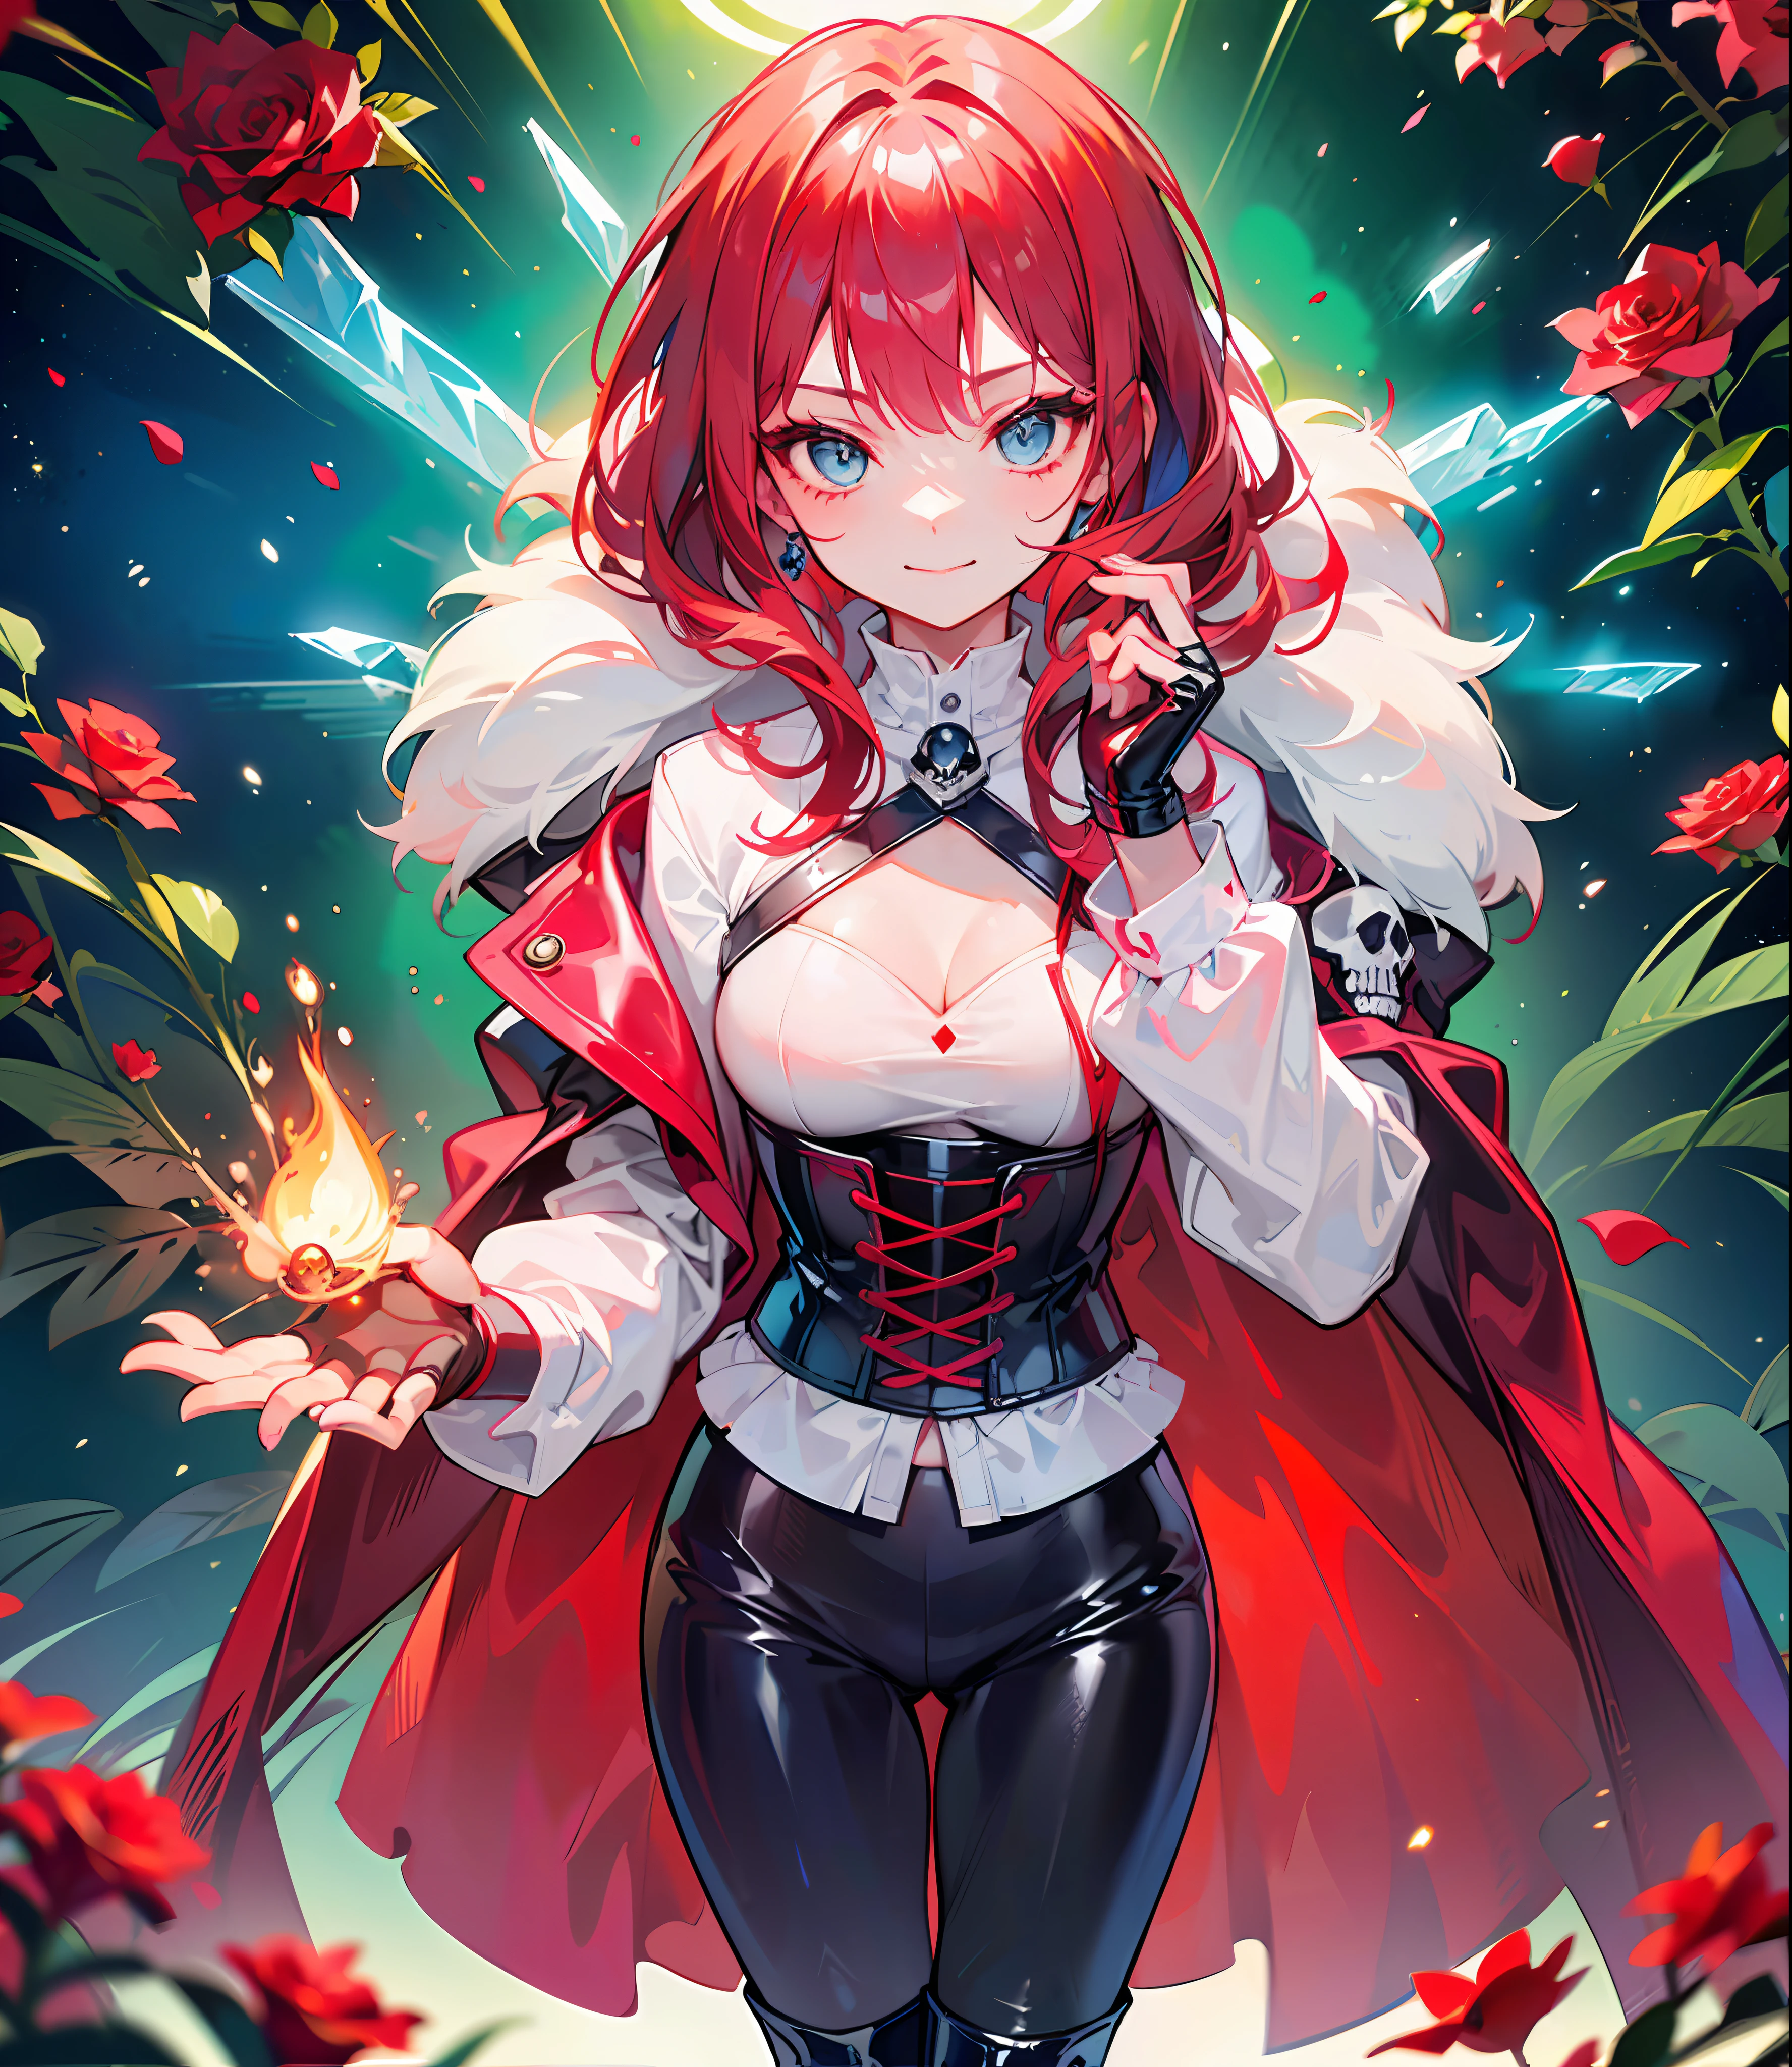 (girl), ((scarlet hair)),(long hair)) ((black latex leggings)), ((latex short boots)), (fingerless gloves) ((white shirt)), (red cloak on hips), ((soldier)), (evil smile)) ((roses on clothes)), ((skulls on clothes)), ((fur on sleeves)), ((fire magic in hand)), ((belligerence)), (small breasts), ((1 person)), ((one girl)) ((portrait)), (black corset), ((night in the background)), (icy blue eyes)), (burgundy hair)), ((without sexualization)),  ((solo)), (((Closed clothes))), Space, cosmic effect, beautiful